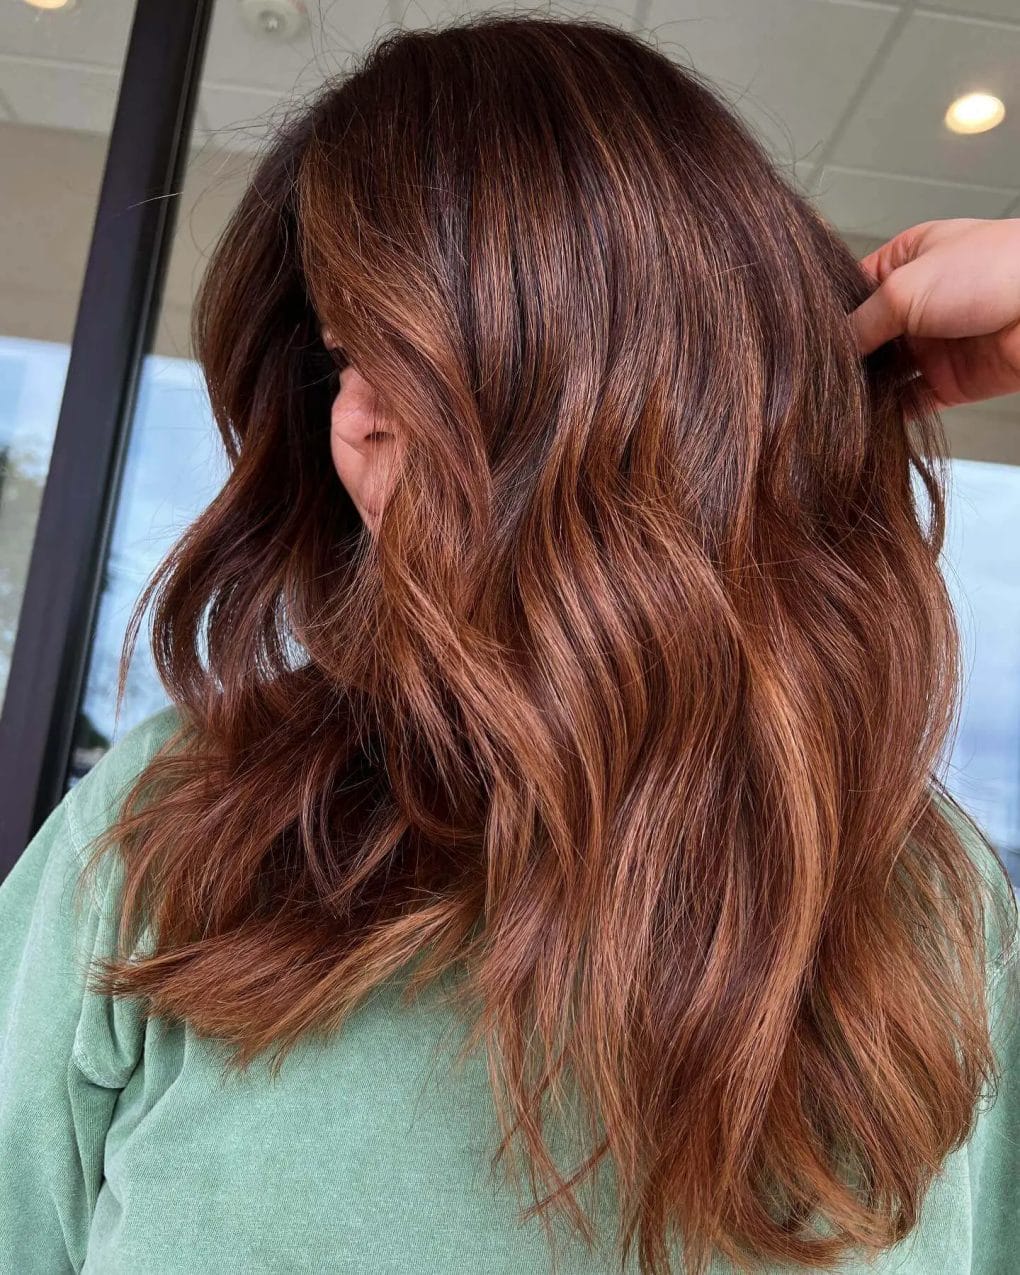 Radiant copper hair with shadow root, voluminous waves, and tousled finish.